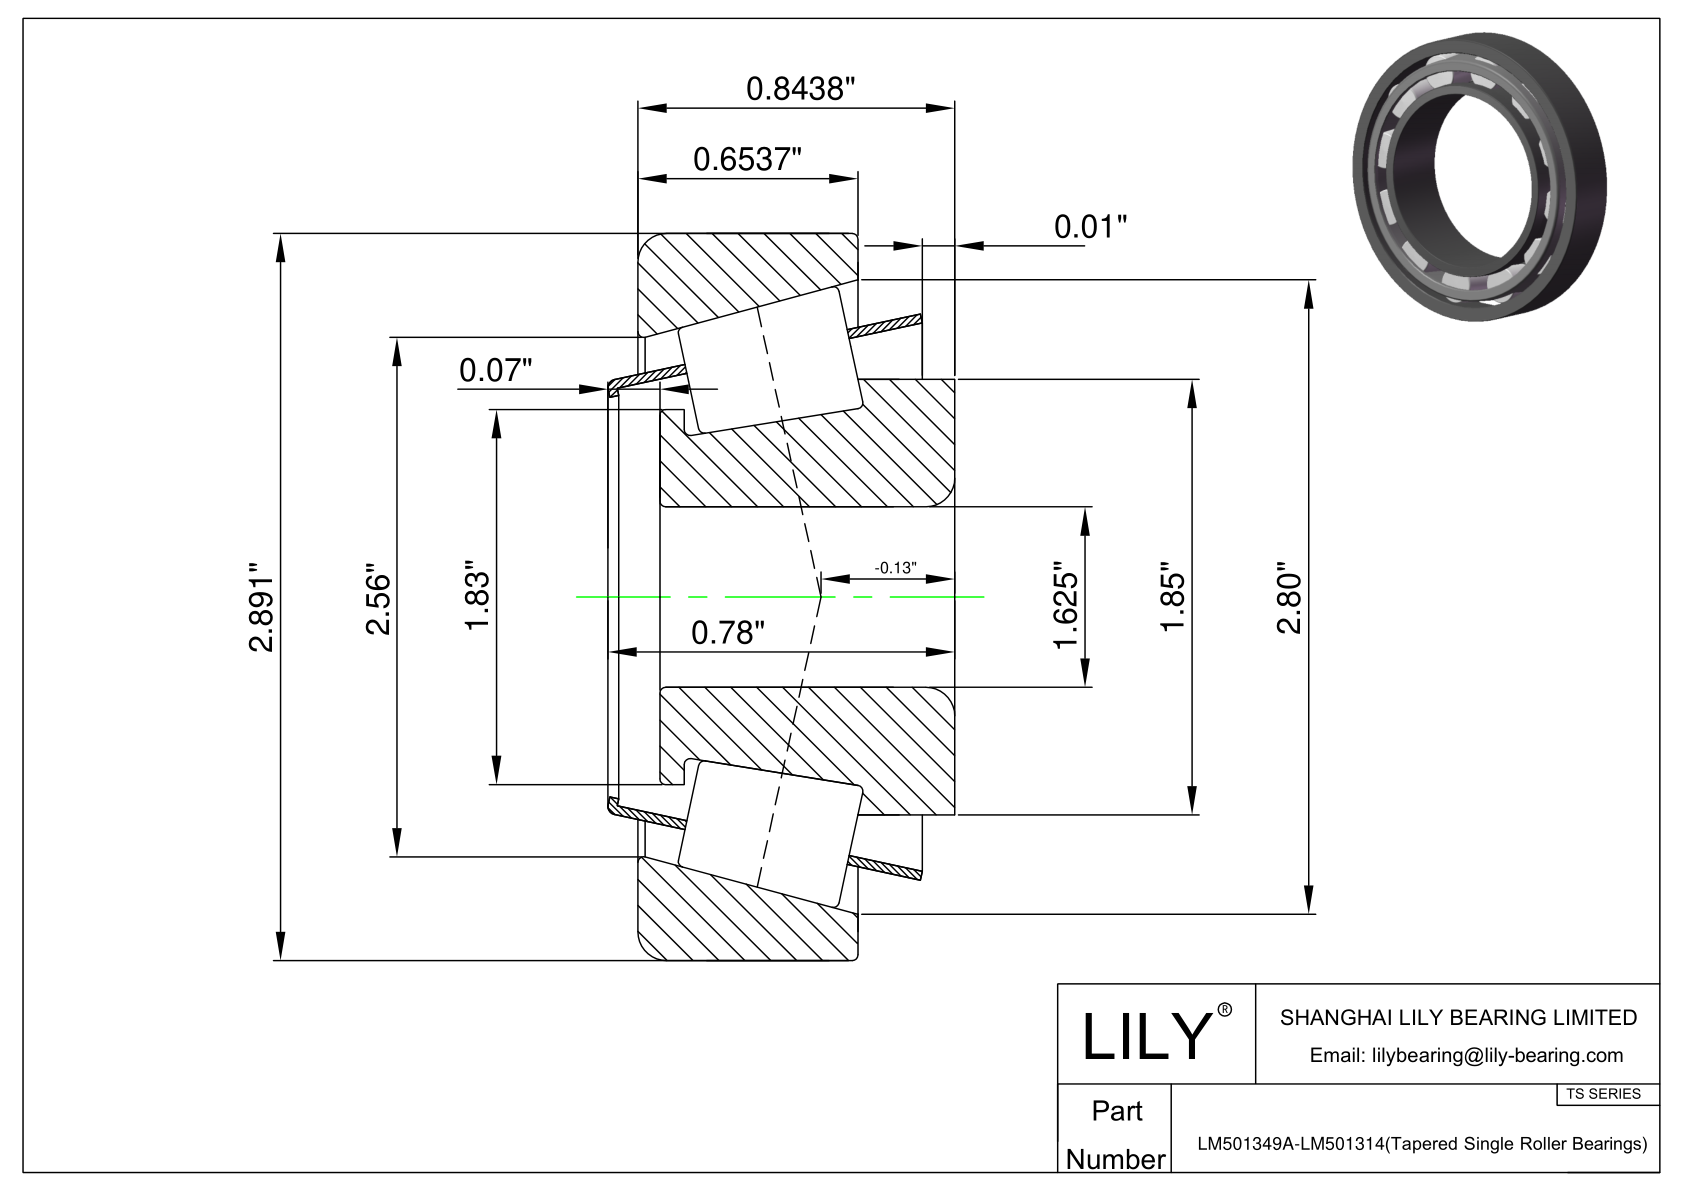 LM501349A-LM501314 TS (Tapered Single Roller Bearings) (Imperial) cad drawing